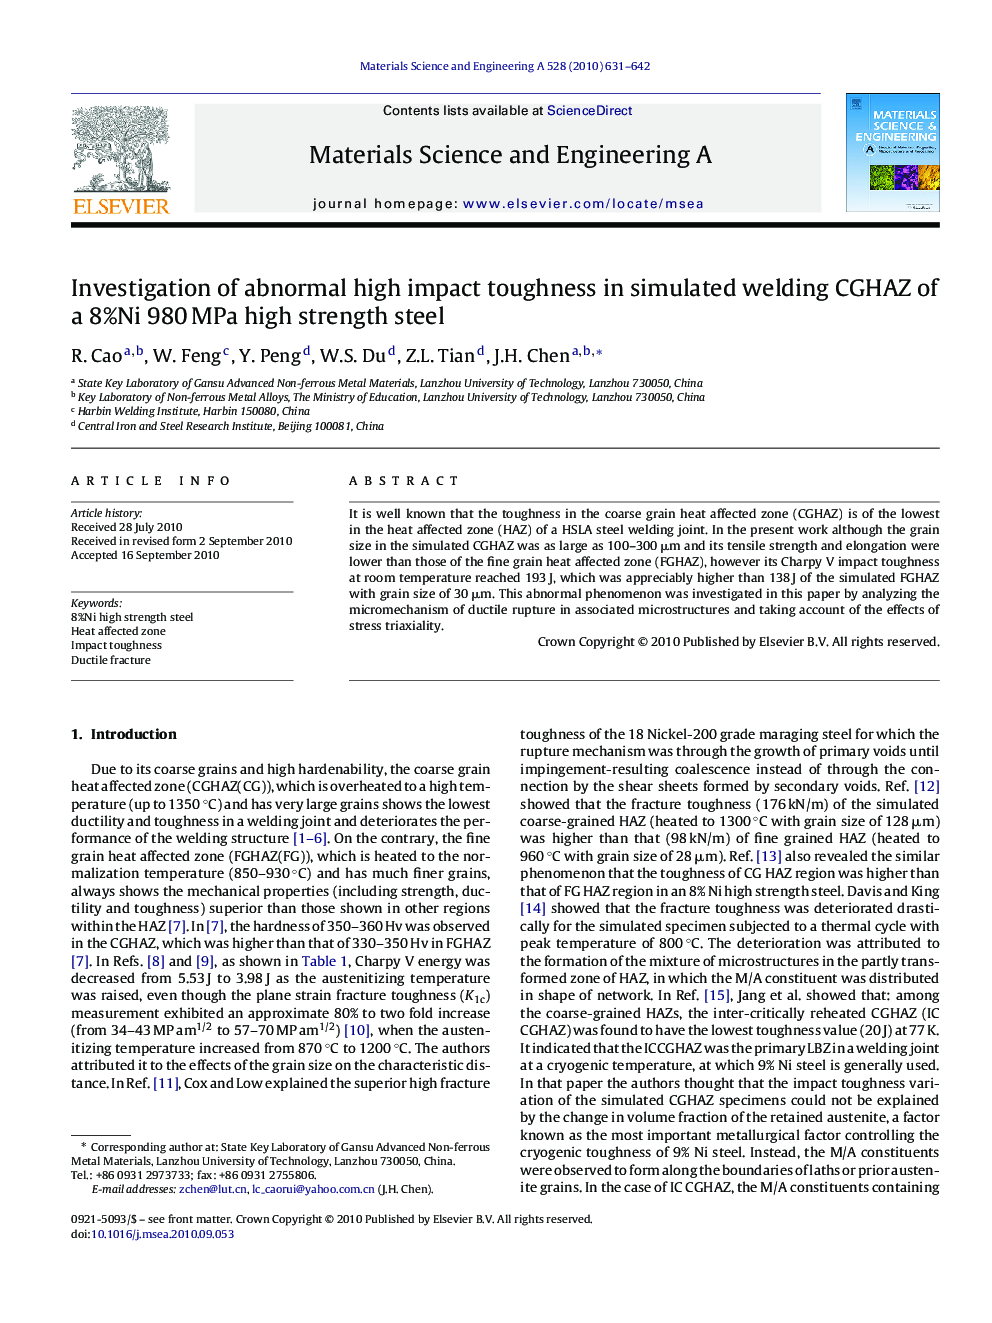 Investigation of abnormal high impact toughness in simulated welding CGHAZ of a 8%Ni 980 MPa high strength steel